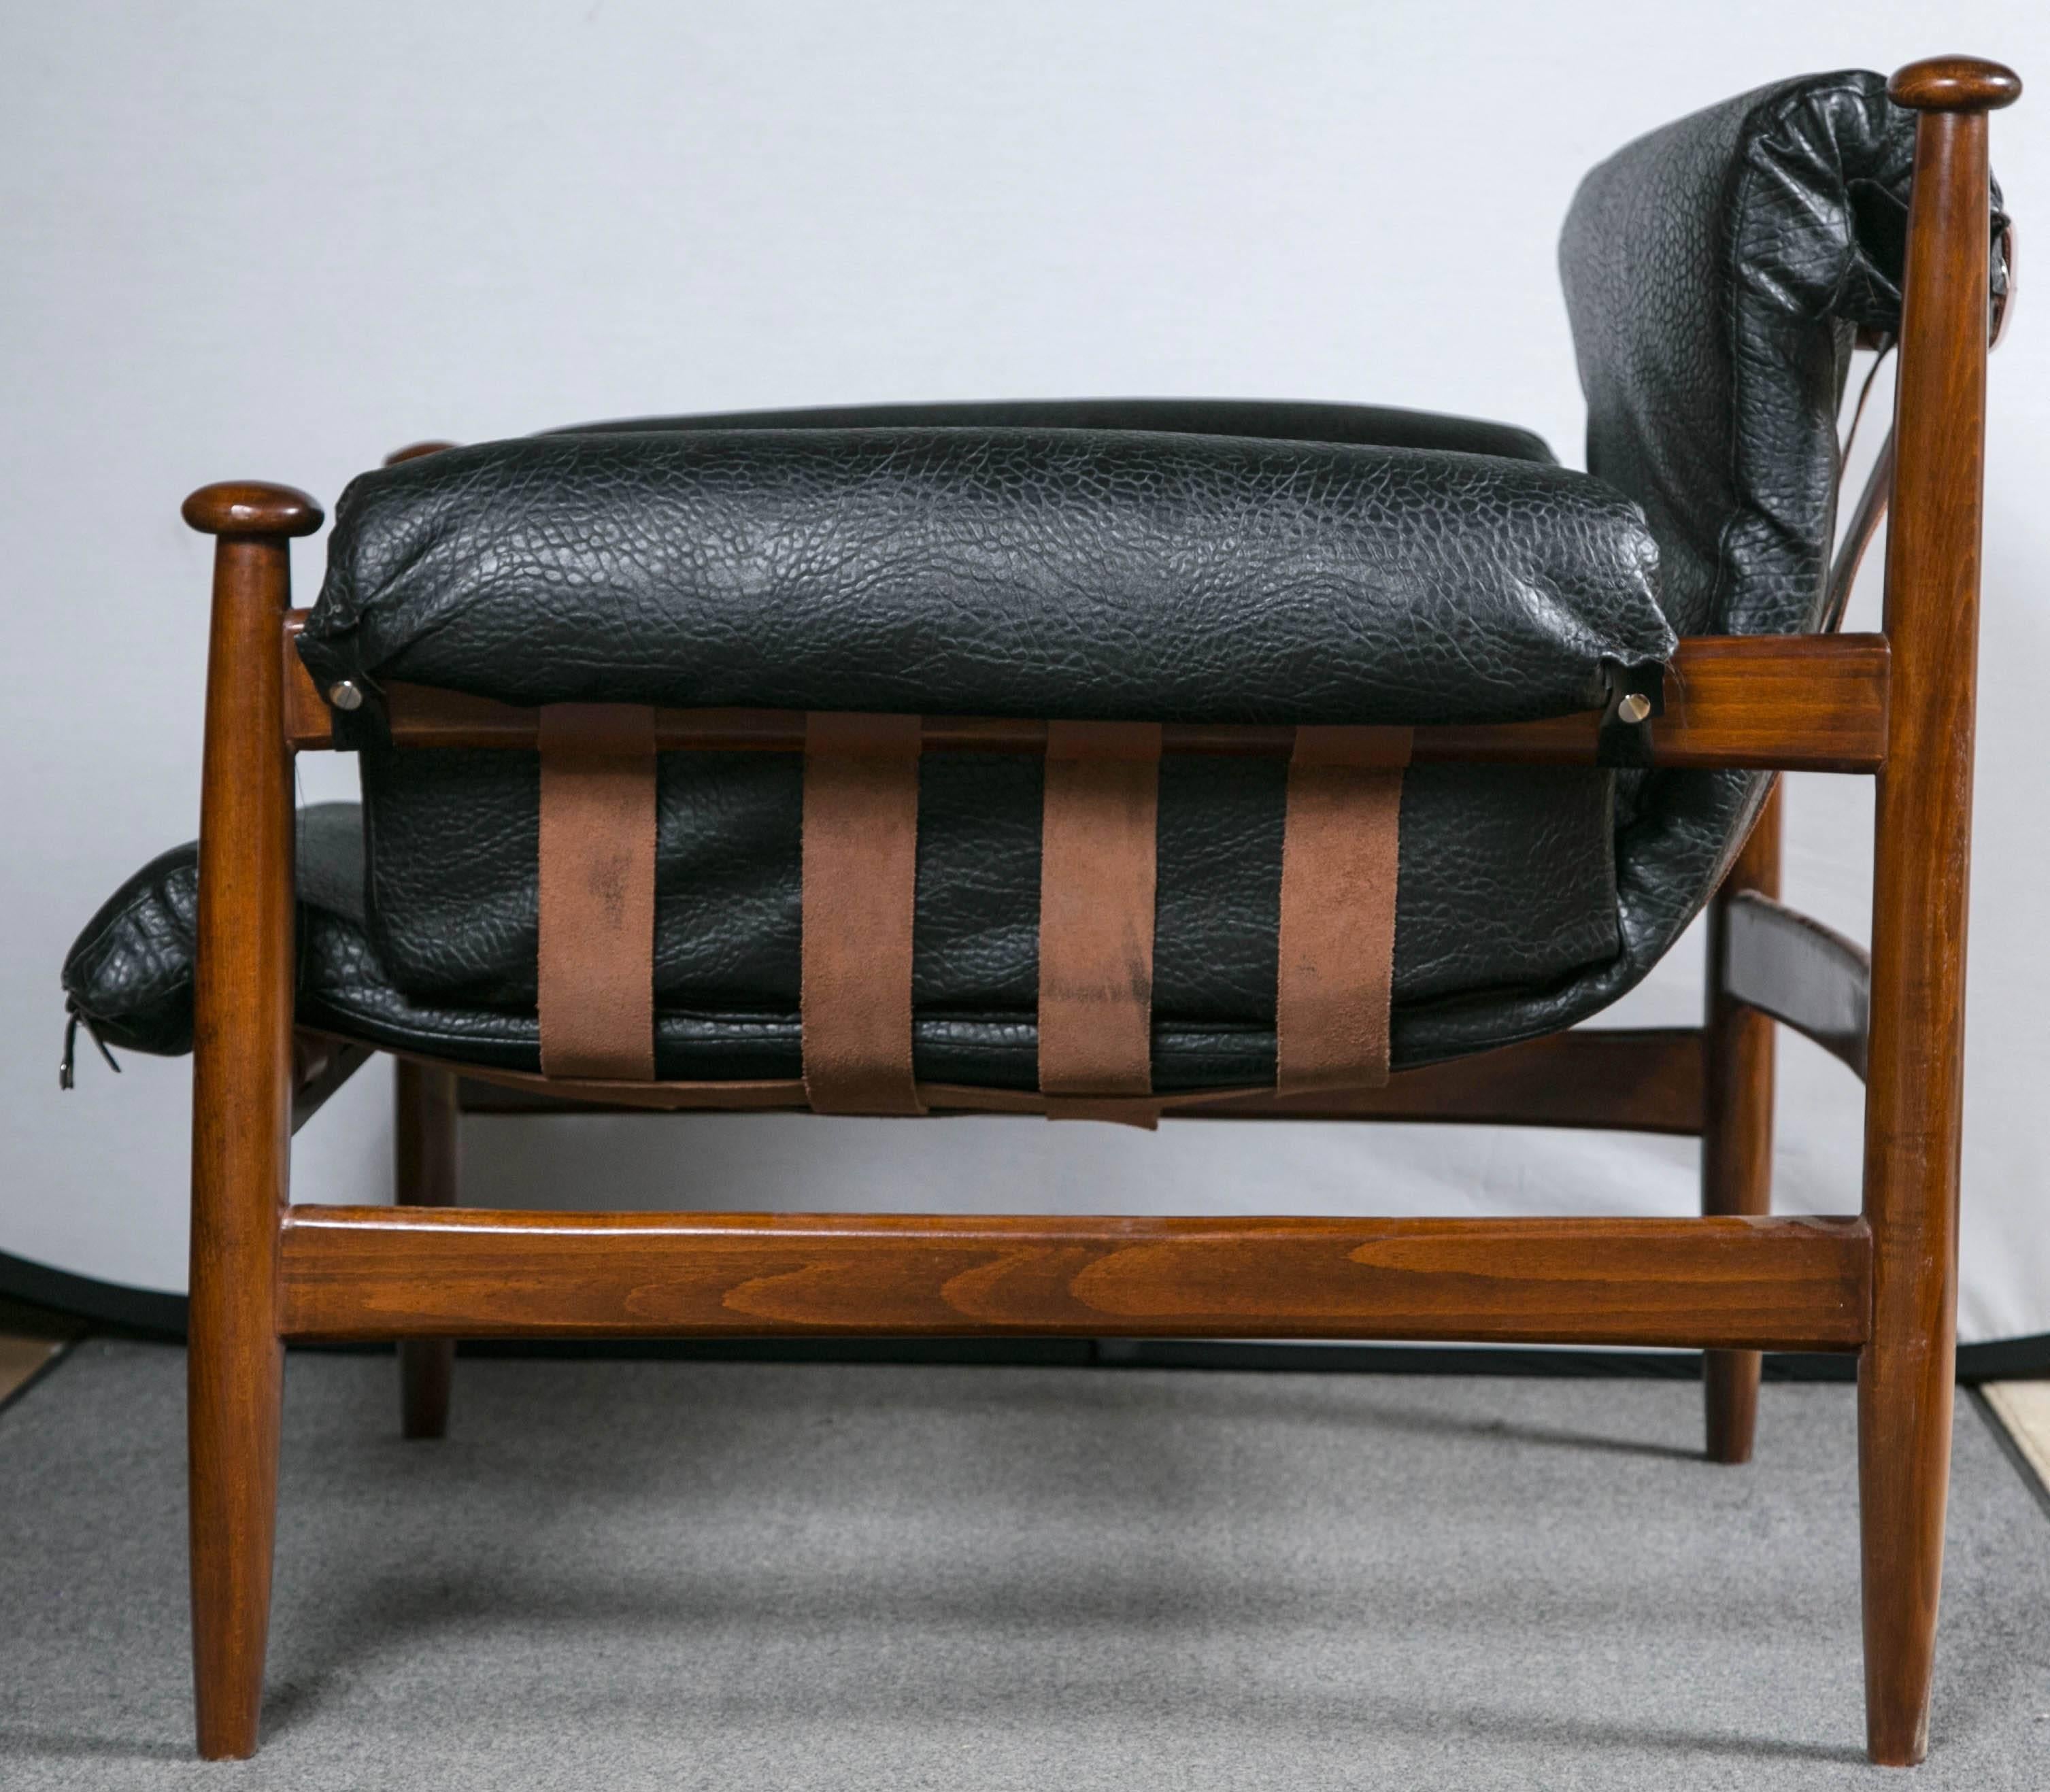 A fine Pair of Finn Juhl designed this lounge chair, known as the bwana chair, in 1962. Its teak frame cradles a comfortable seat upholstered in rich olive blackish Faux leather. . 